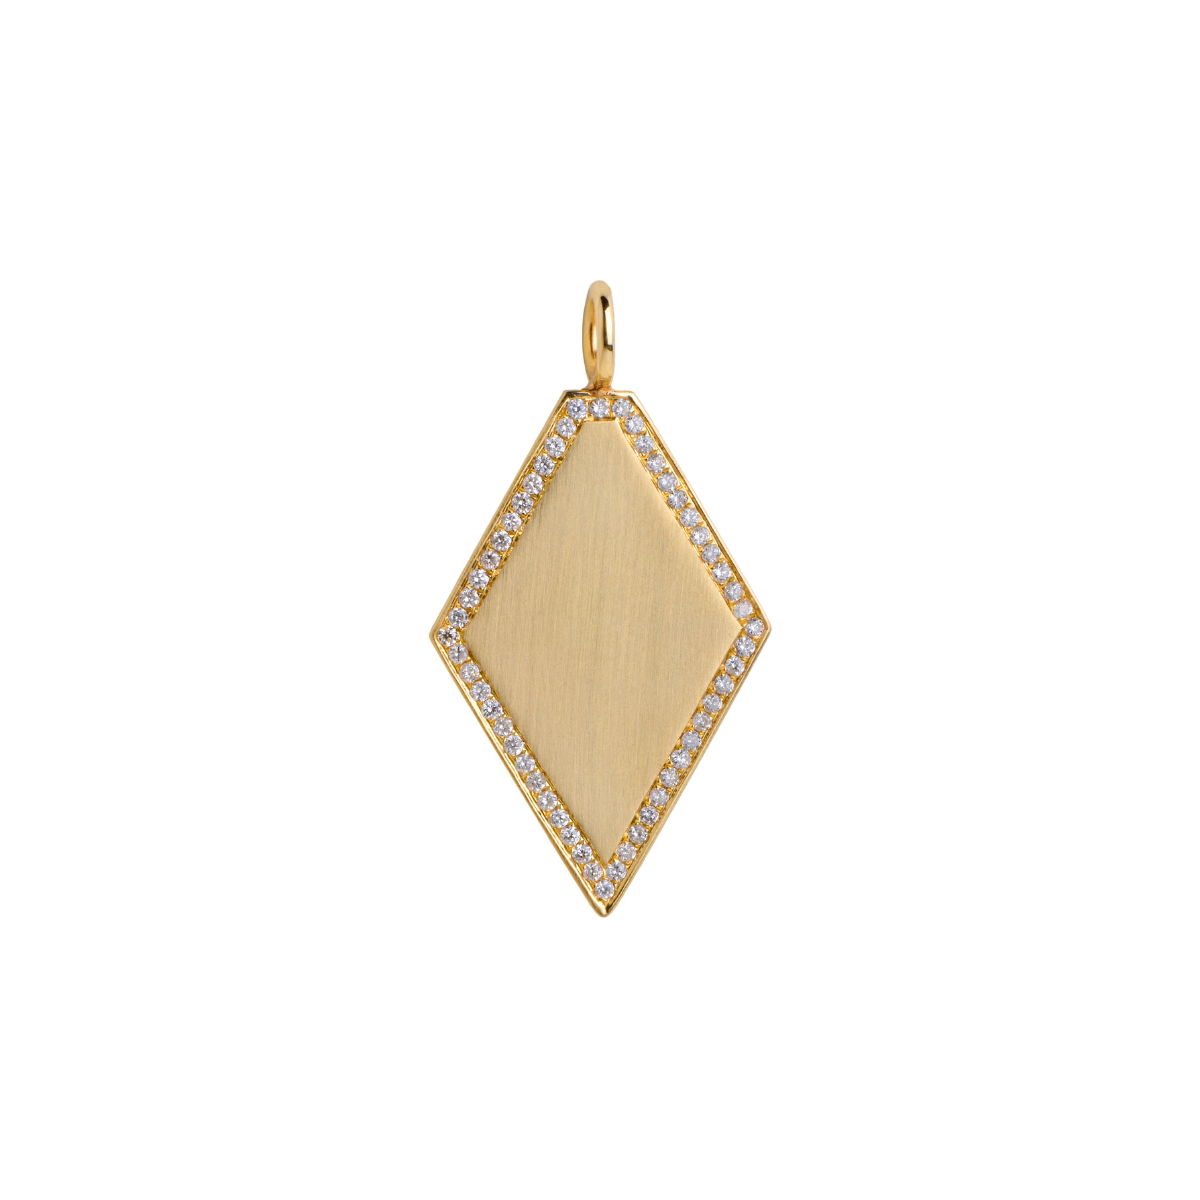 Bridget King Diamond Shaped Pendant in Yellow Gold - Engraving Available